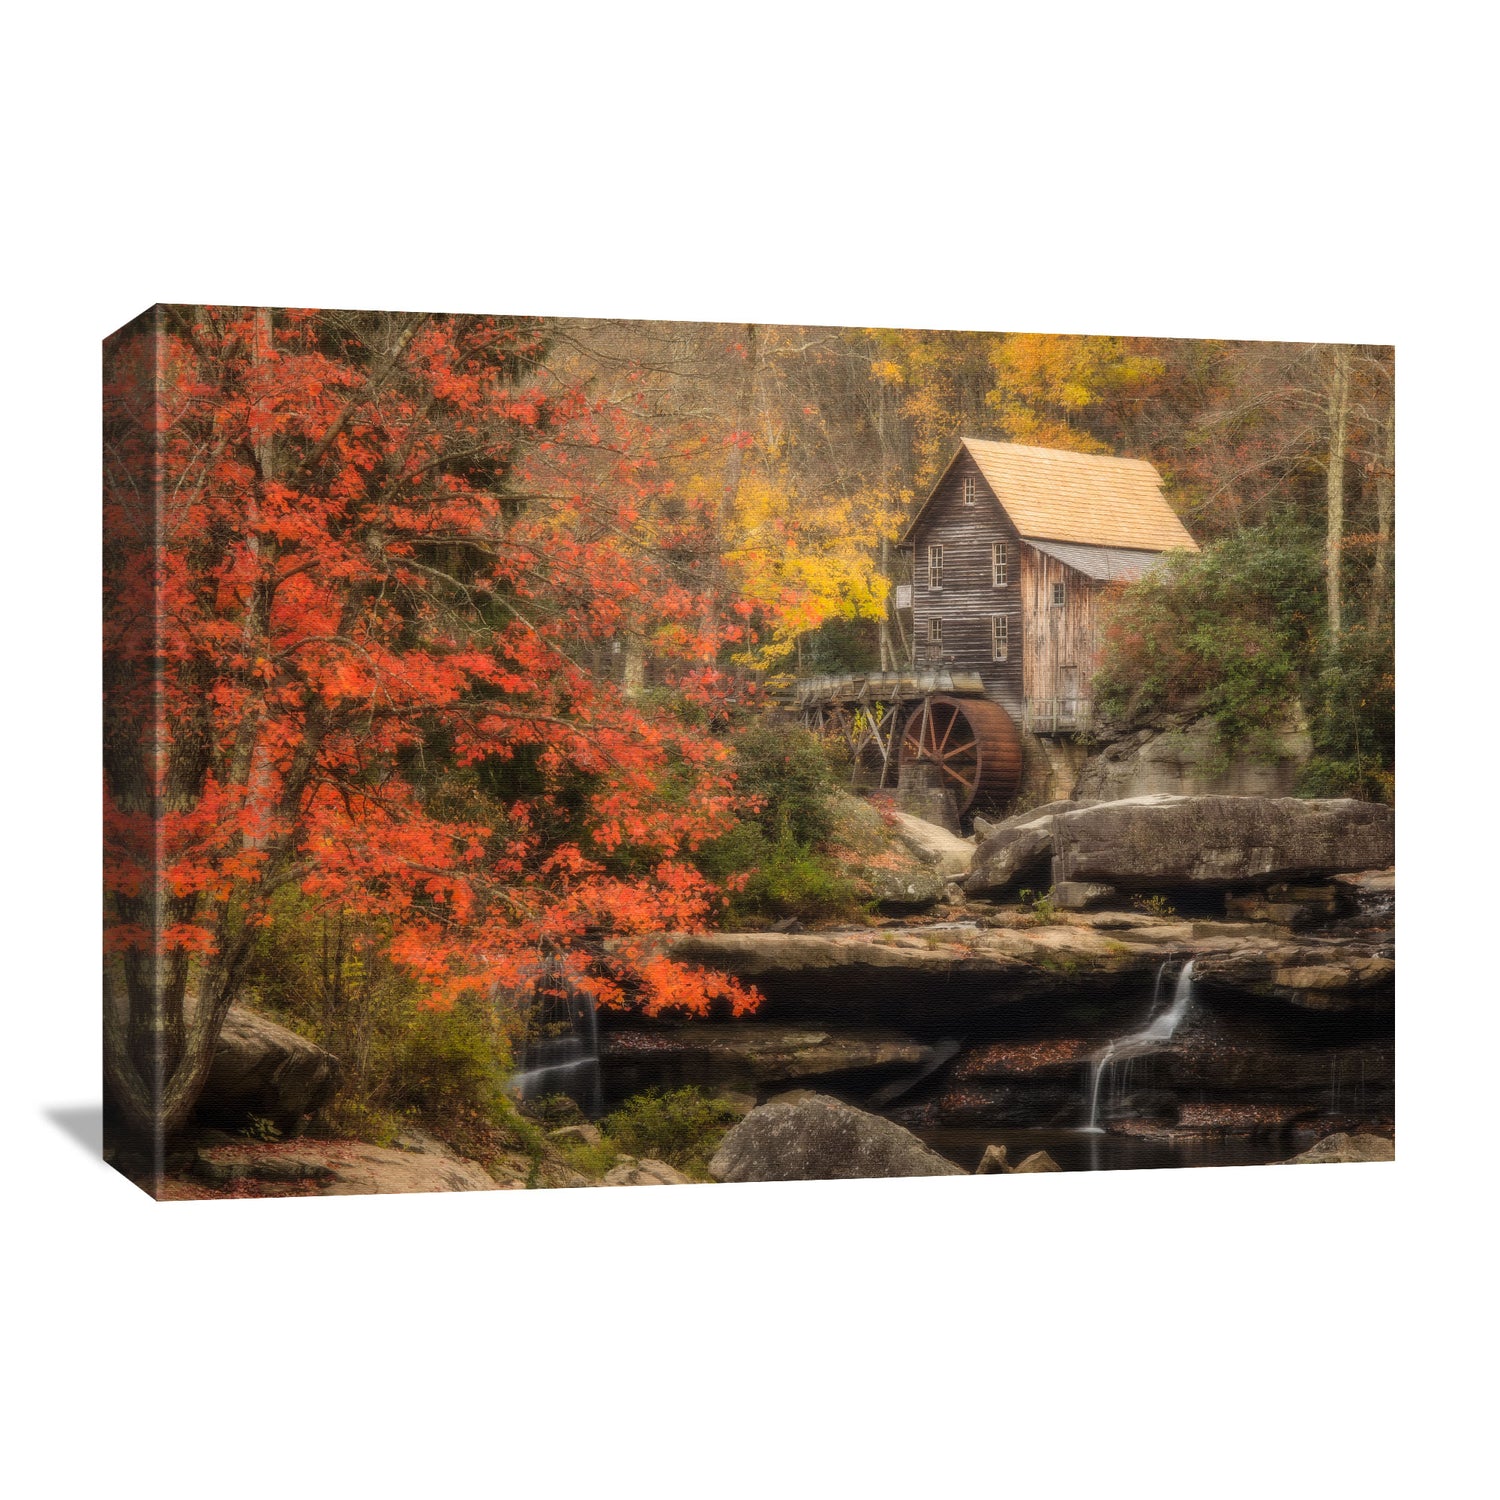 Fall landscape photograph of Glade Creek Grist Mill on durable canvas, using fade-resistant ink and kiln-dried pine stretcher bars for support.